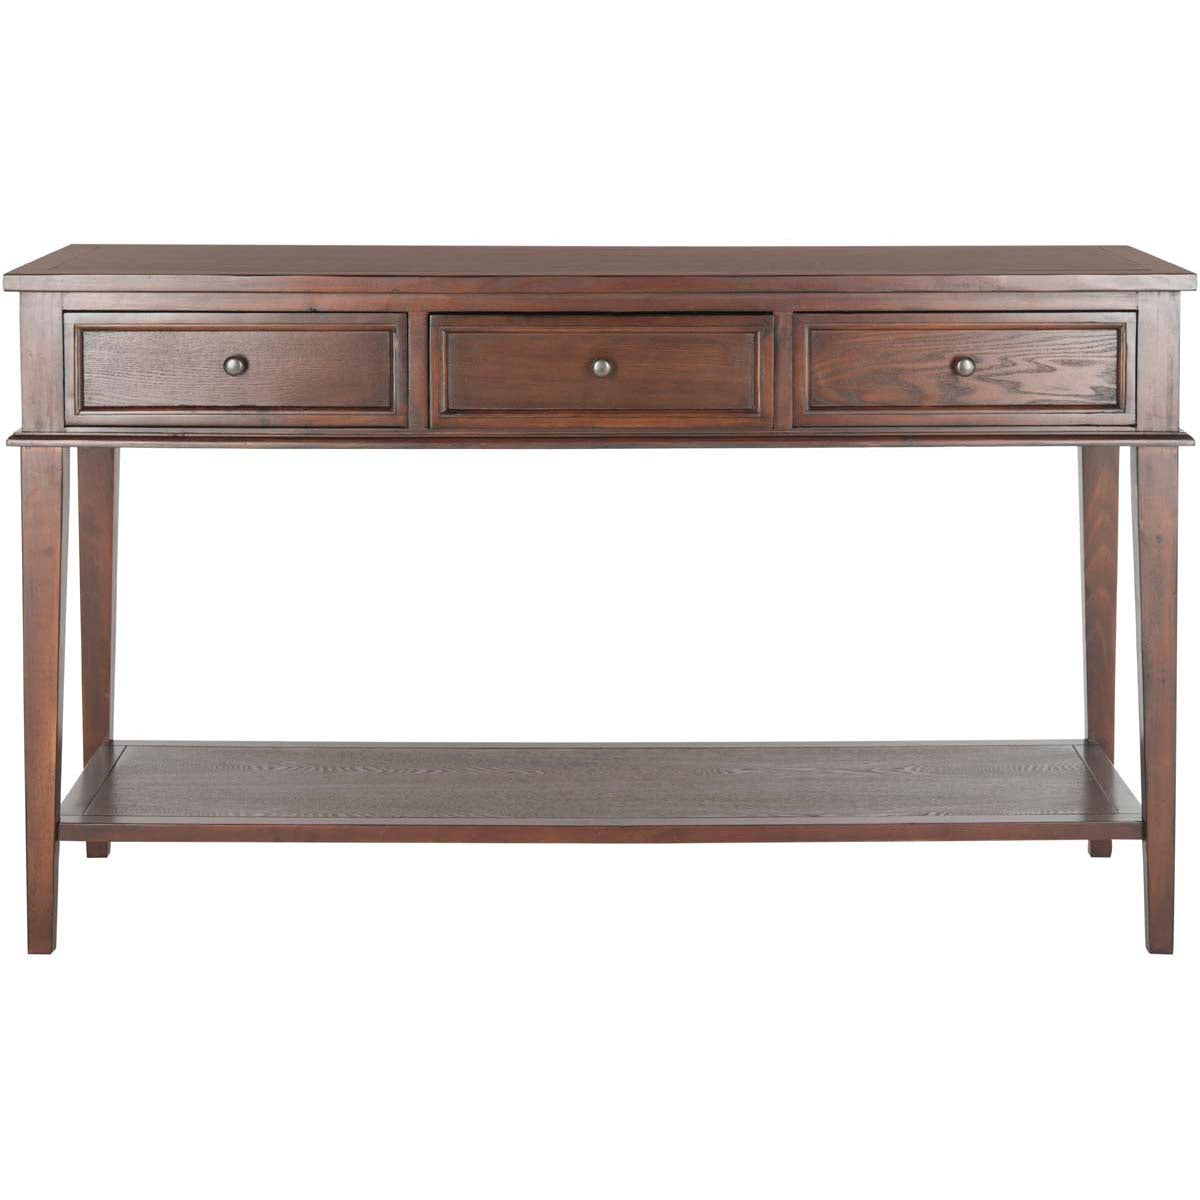 Safavieh Manelin Console With Storage Drawers , AMH6641 - Sepia